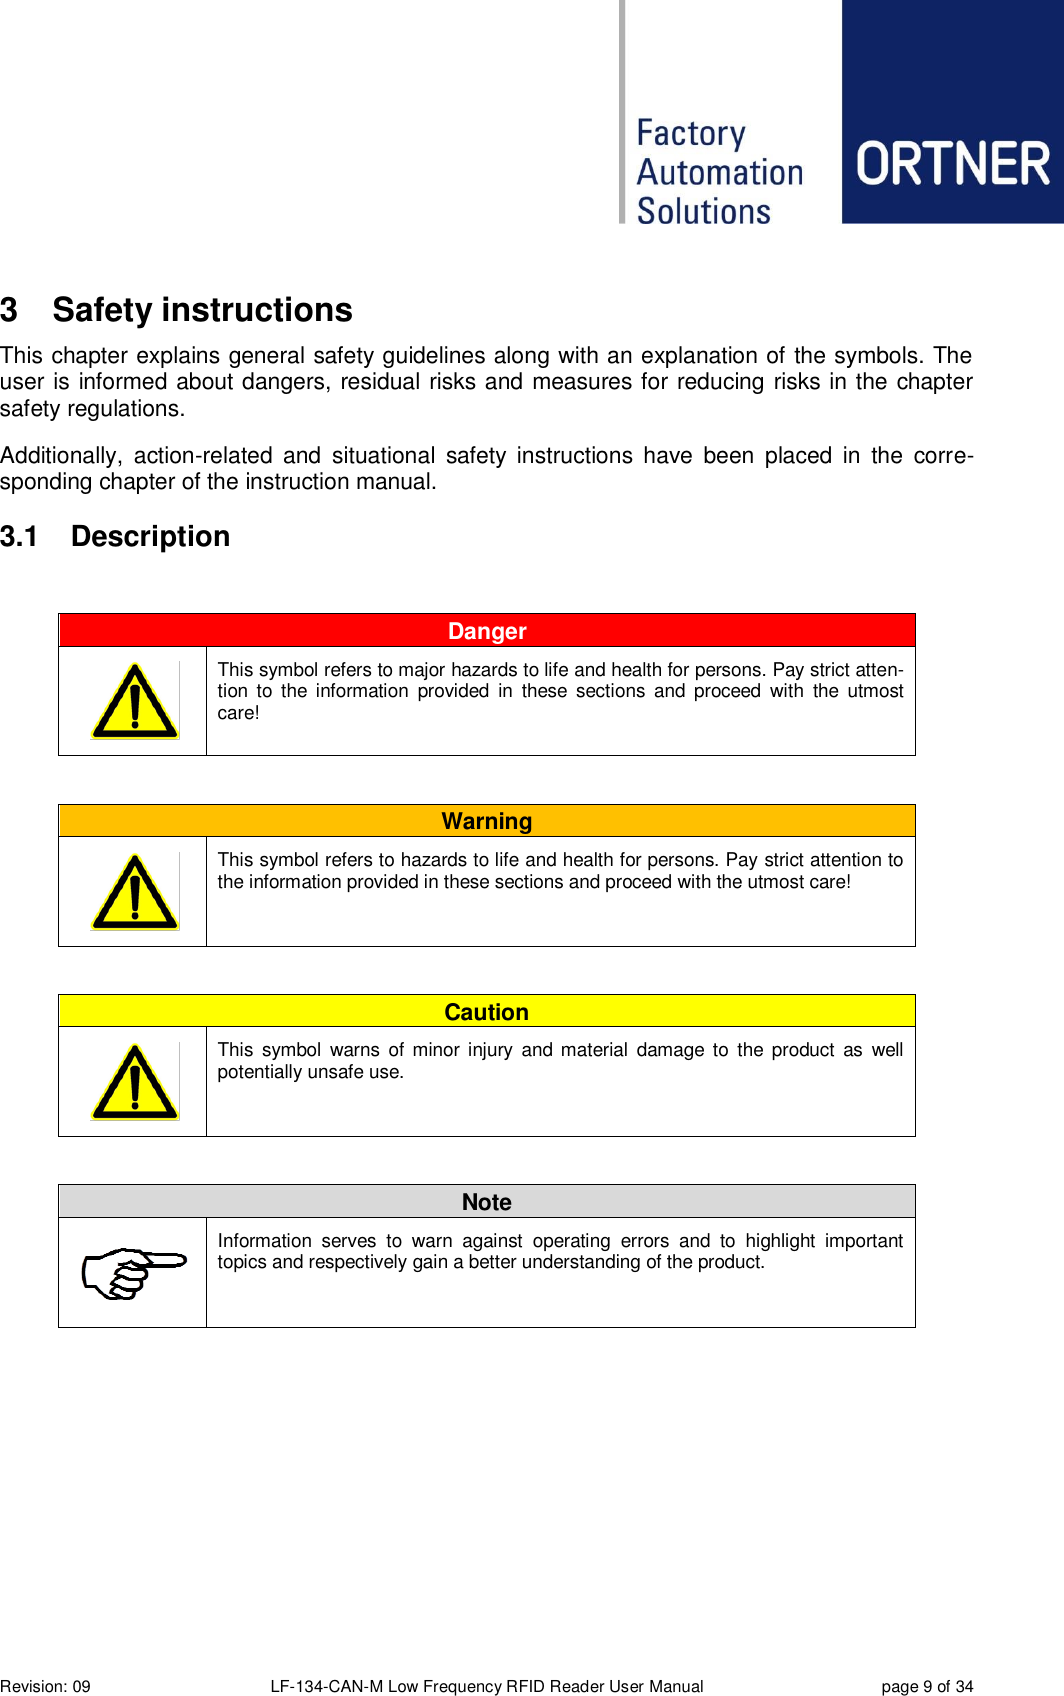  Revision: 09 LF-134-CAN-M Low Frequency RFID Reader User Manual  page 9 of 34 3  Safety instructions This chapter explains general safety guidelines along with an explanation of the symbols. The user is informed about dangers, residual risks and measures for reducing risks in the chapter safety regulations.  Additionally,  action-related  and  situational  safety  instructions  have  been  placed  in  the  corre-sponding chapter of the instruction manual. 3.1  Description  Danger       This symbol refers to major hazards to life and health for persons. Pay strict atten-tion  to the  information  provided  in  these  sections  and proceed  with  the  utmost care!  Warning       This symbol refers to hazards to life and health for persons. Pay strict attention to the information provided in these sections and proceed with the utmost care!  Caution       This  symbol  warns  of  minor  injury  and material  damage to  the  product  as  well potentially unsafe use.  Note  Information  serves  to  warn  against  operating  errors  and  to  highlight  important topics and respectively gain a better understanding of the product.    